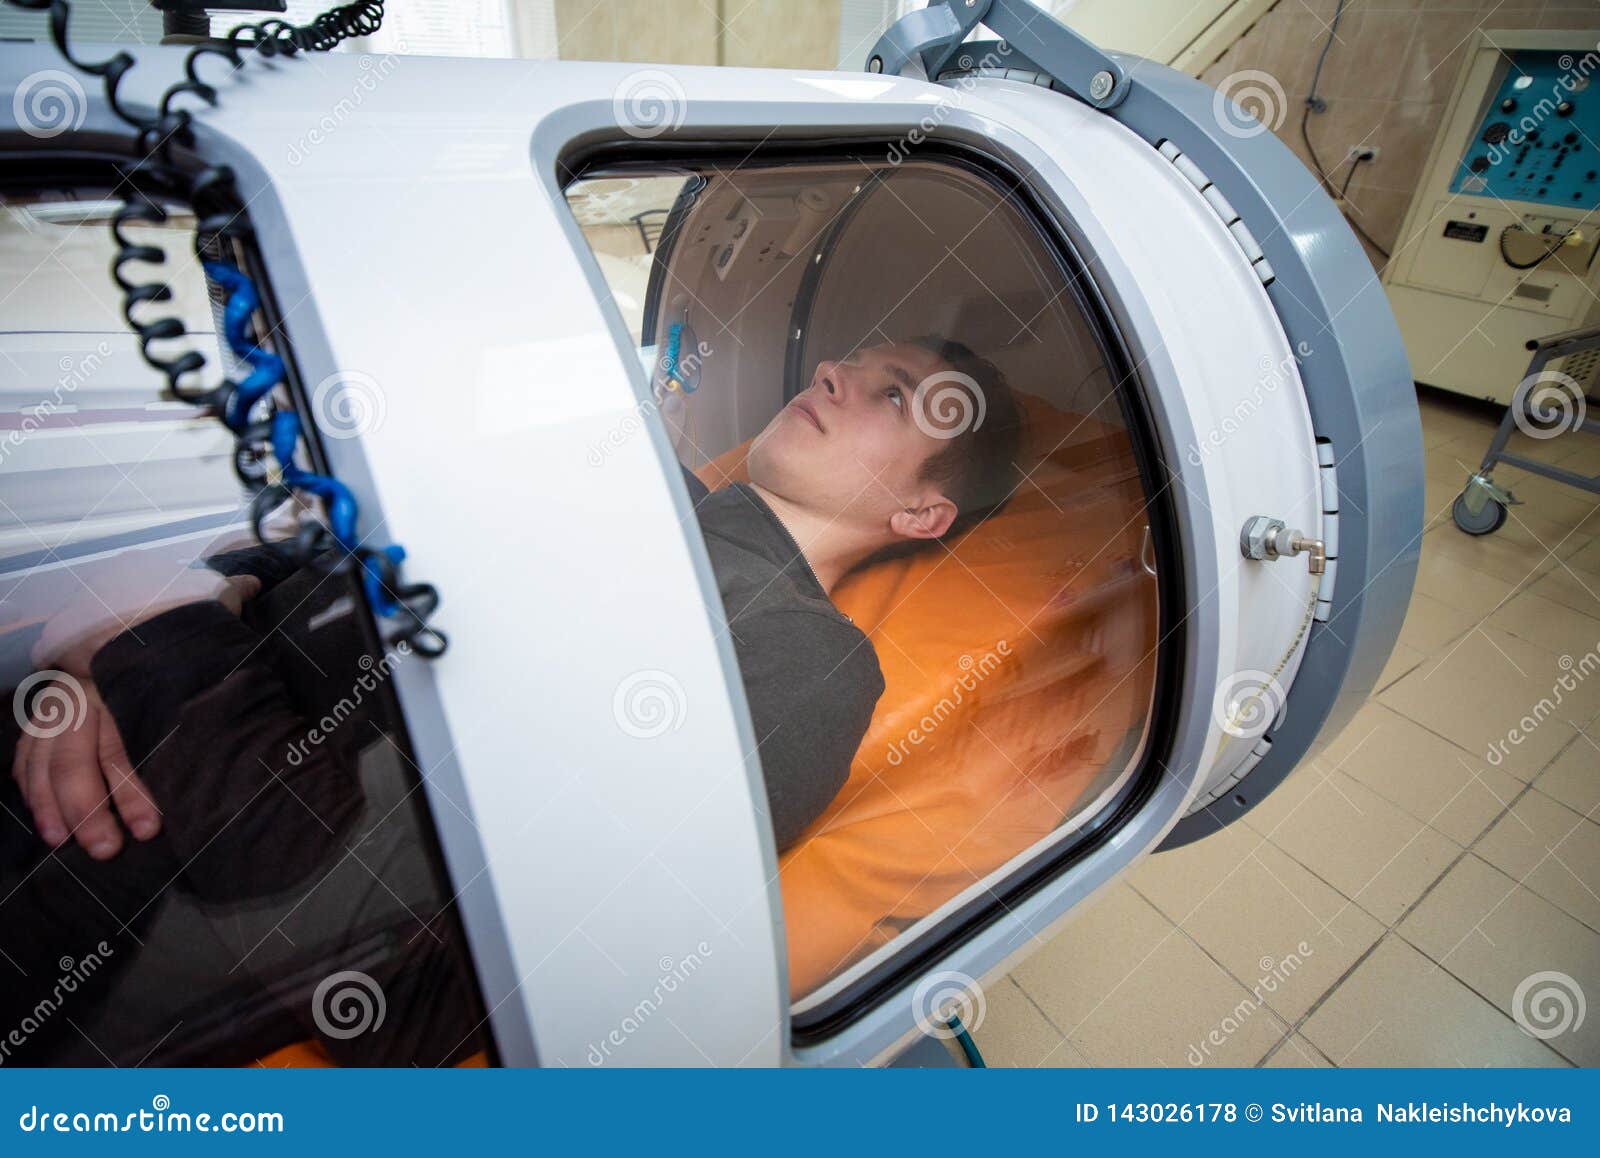 young guy in a hyperbaric chamber, oxygen treatment